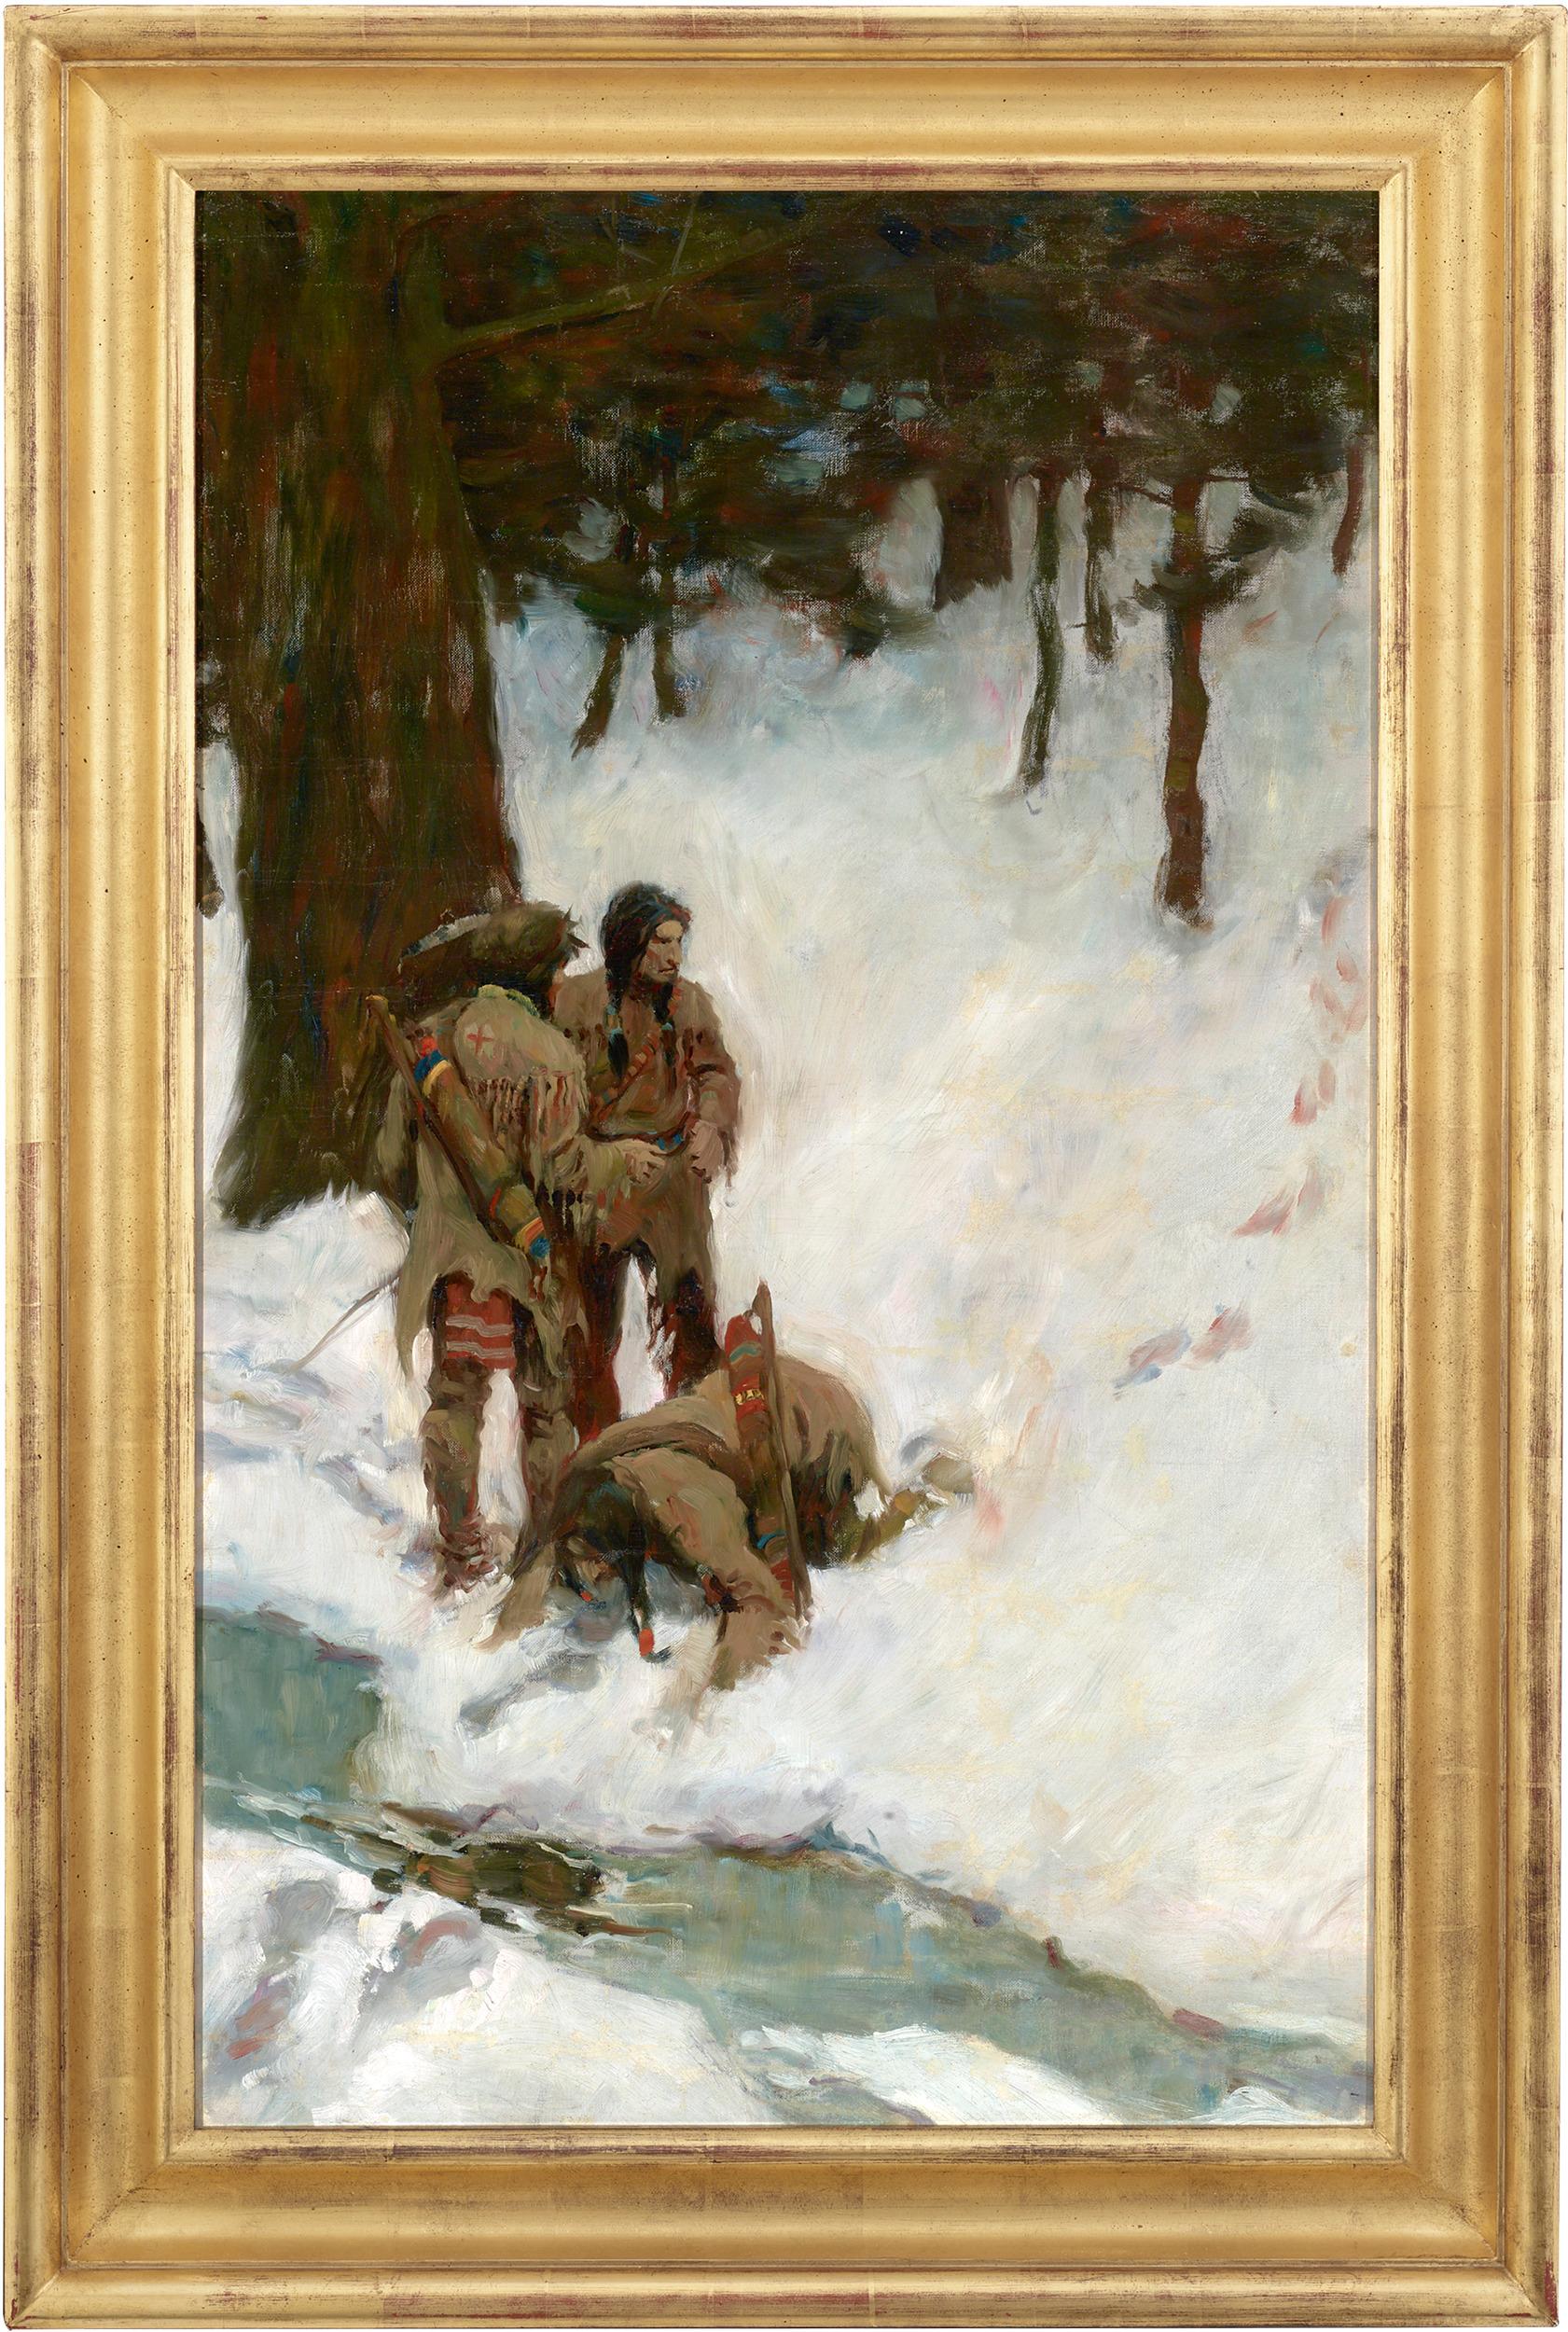 Newell Convers Wyeth Figurative Painting - Untitled (Three Indians at a Stream in Snowy Woods) by N.C. Wyeth